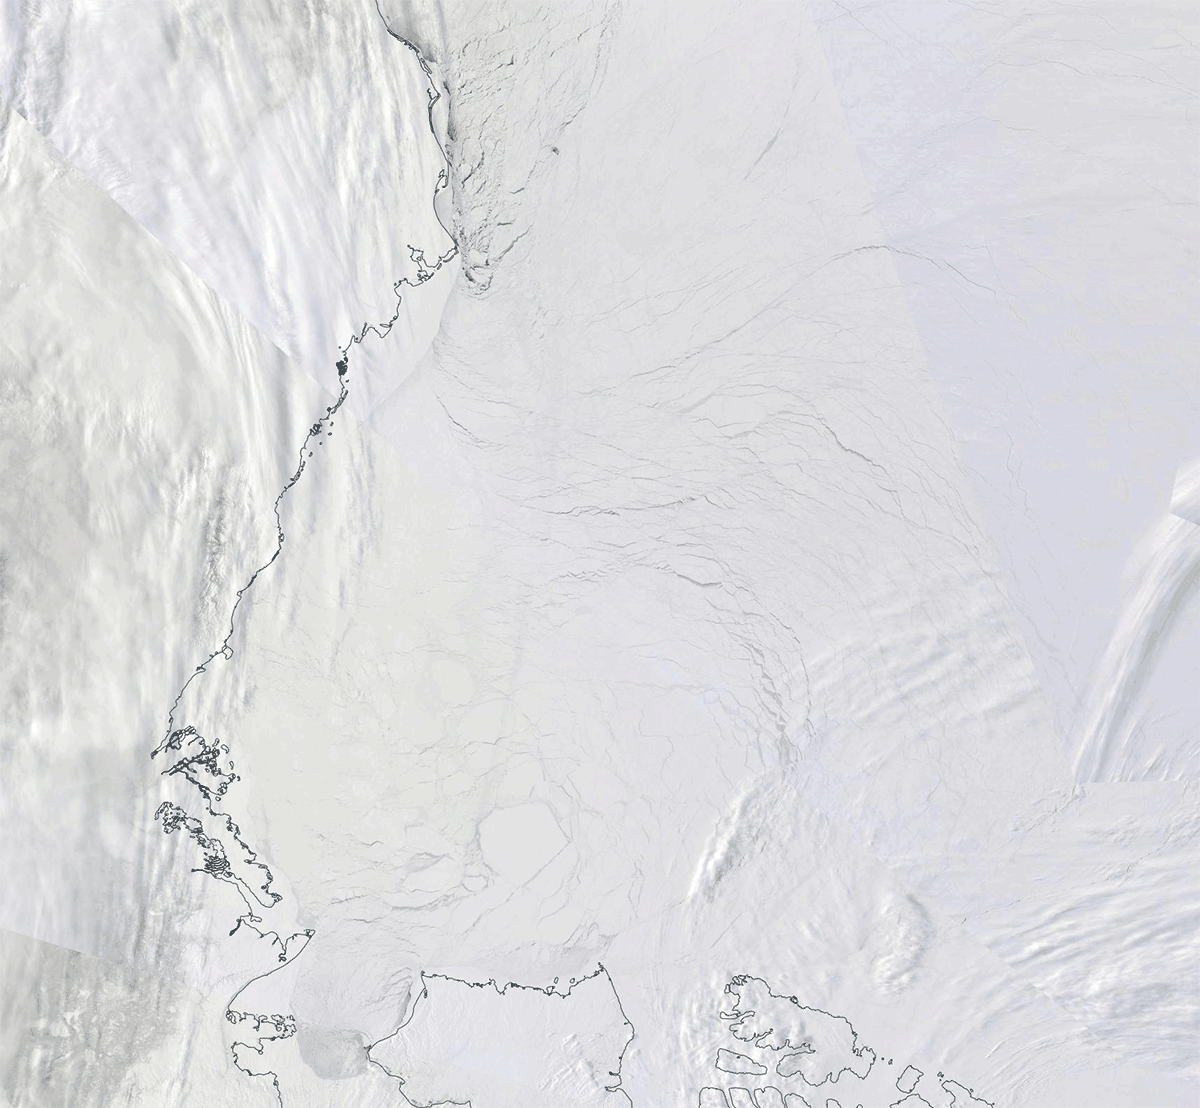 This series of images from April 1 to 24, 2016, shows recent fracturing and rotation of sea ice near Alaska and the western Canadian Arctic archipelago. 